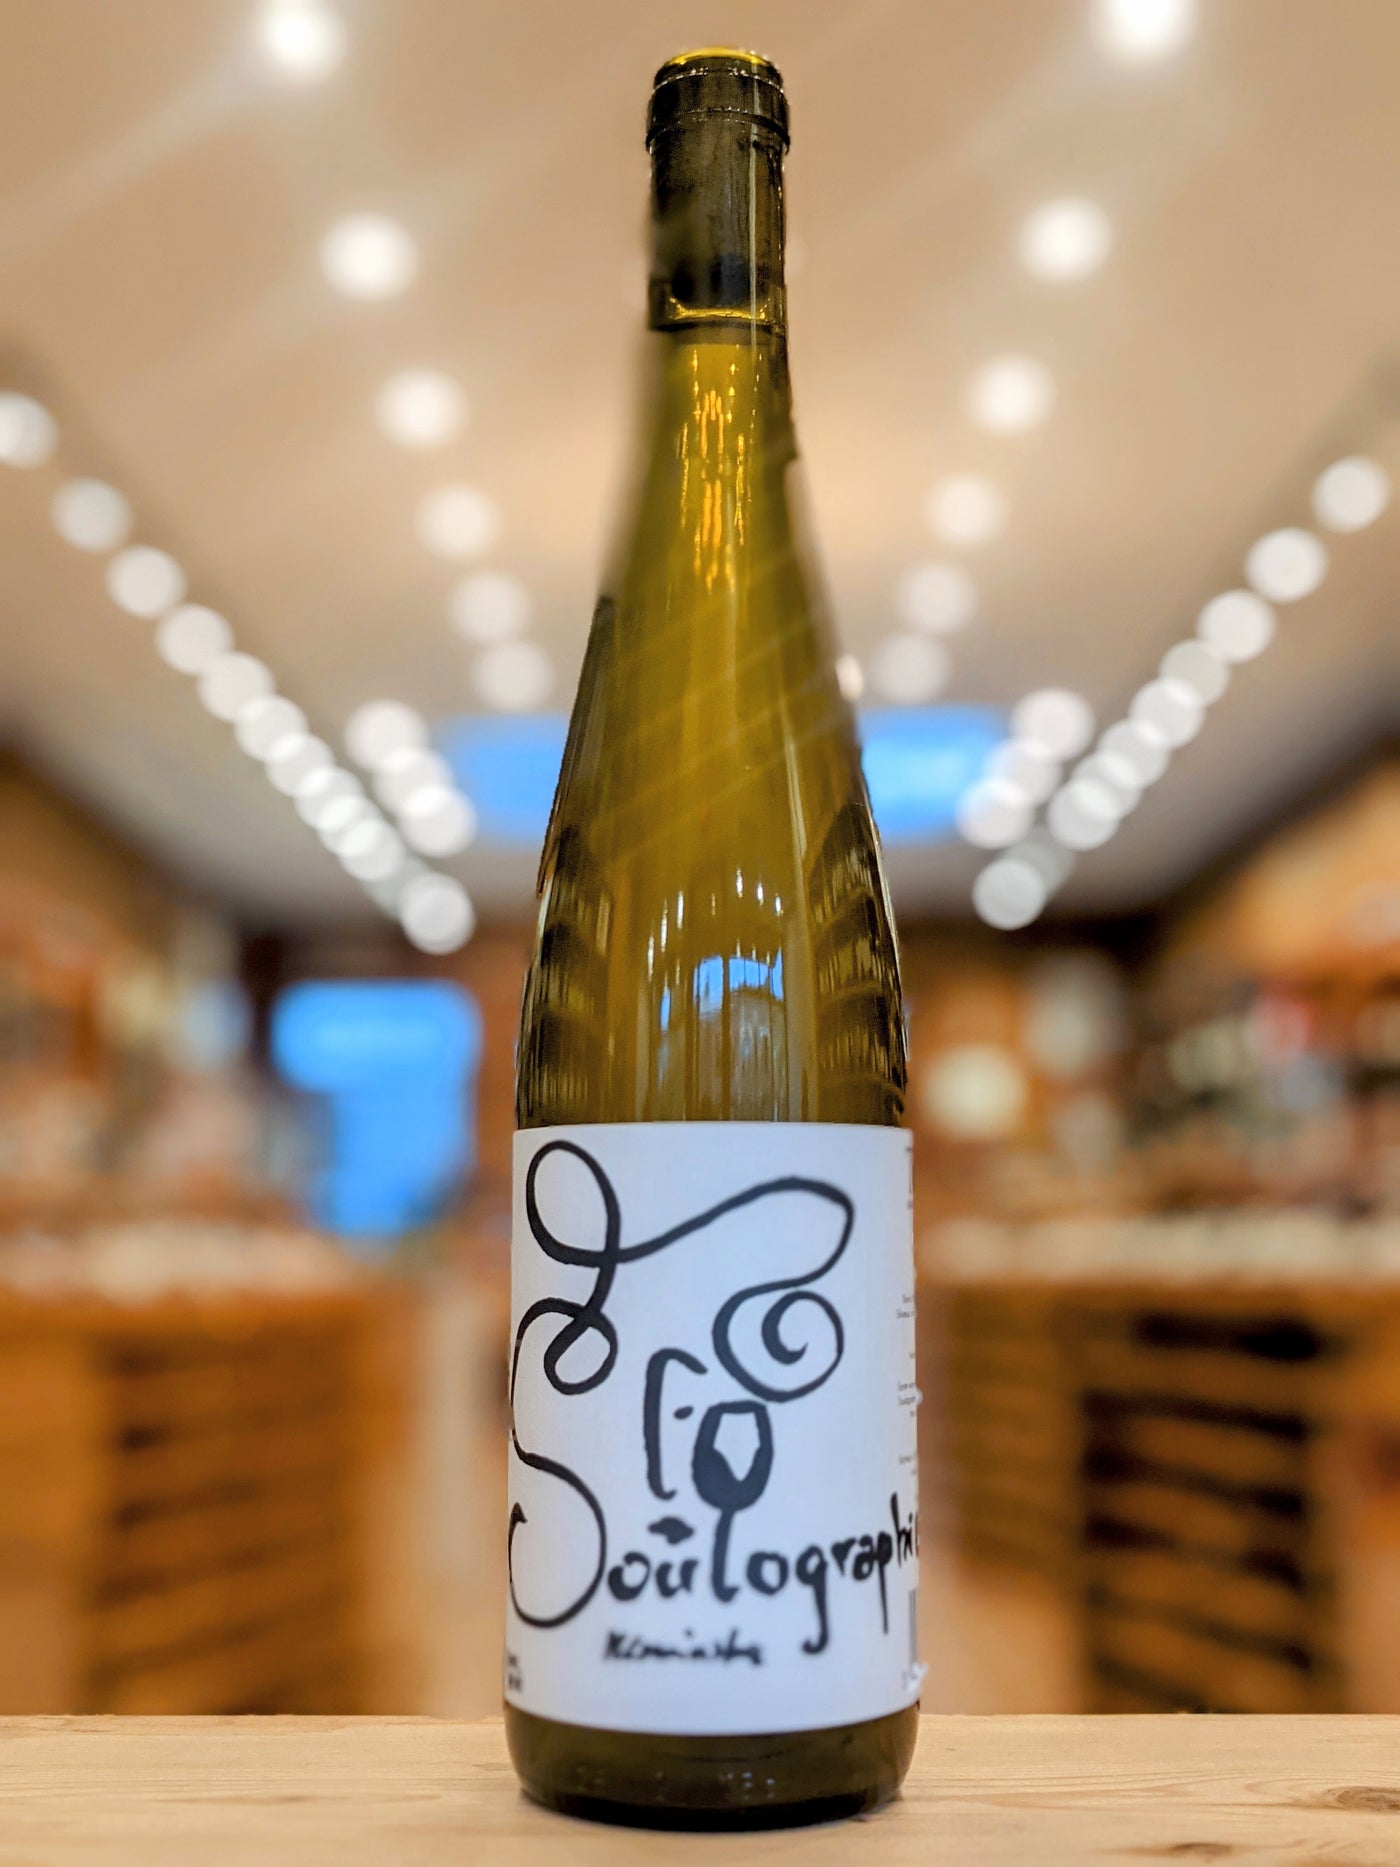 Sons of Wine Soulographie Blanc VDF 2020